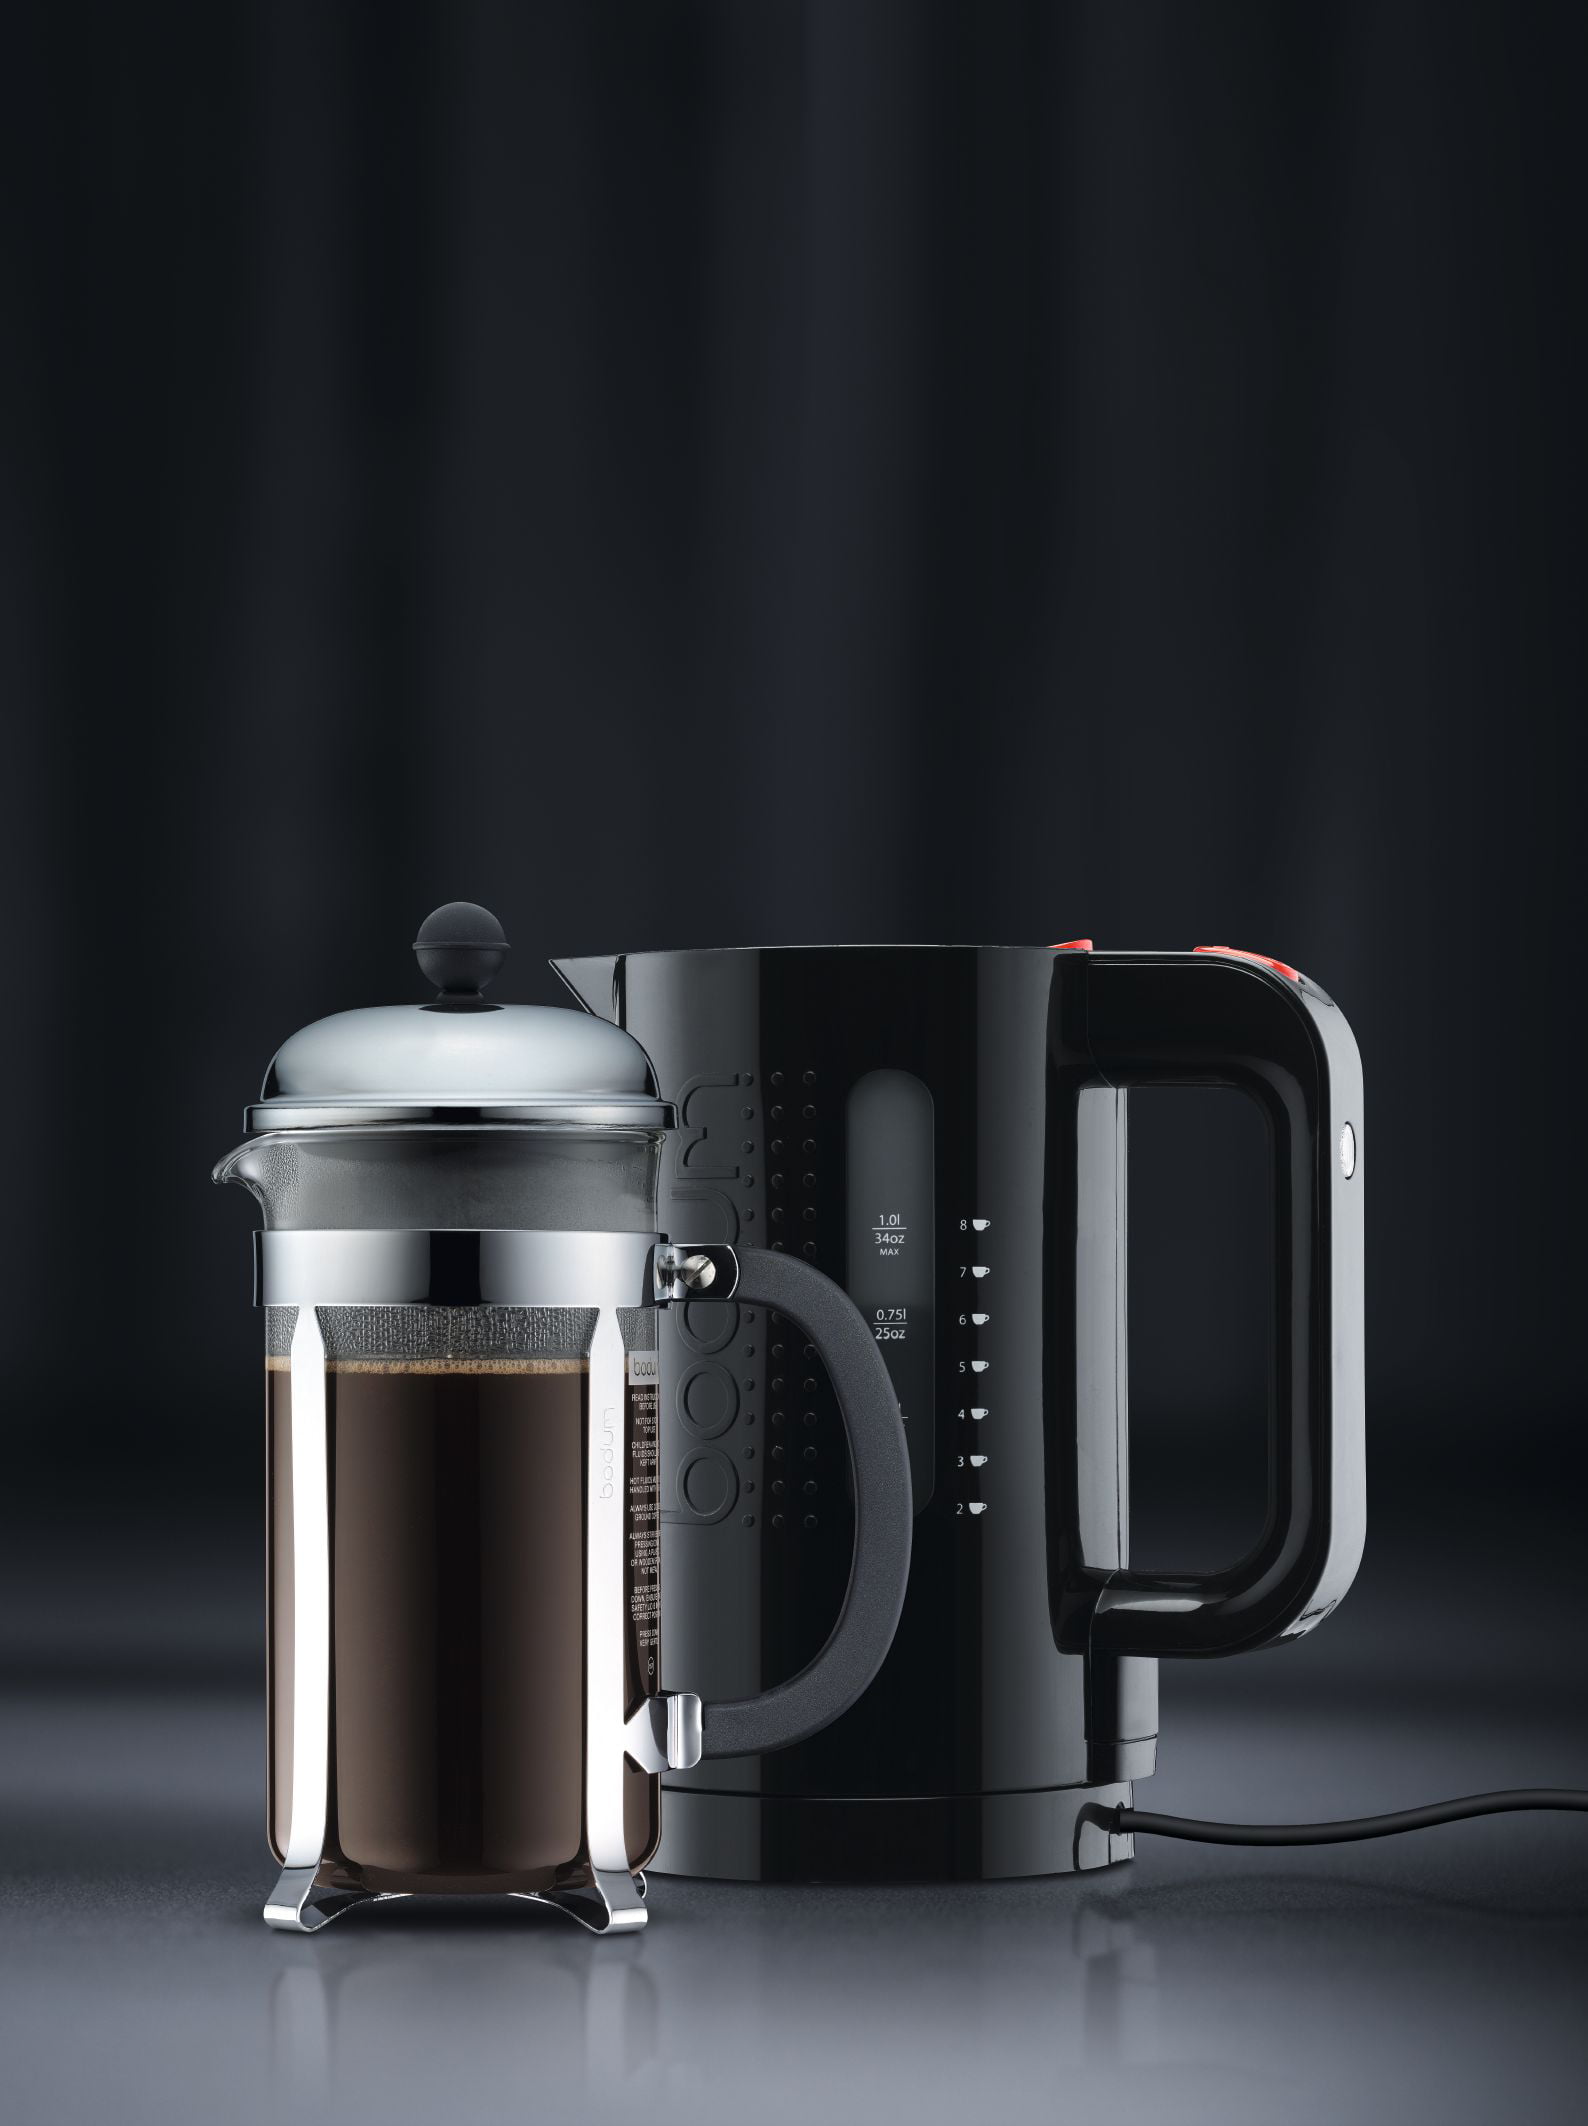 Bodum Bistro Electric Water Kettle 1 Liter/34 oz 8 Cups Black - *Tested*